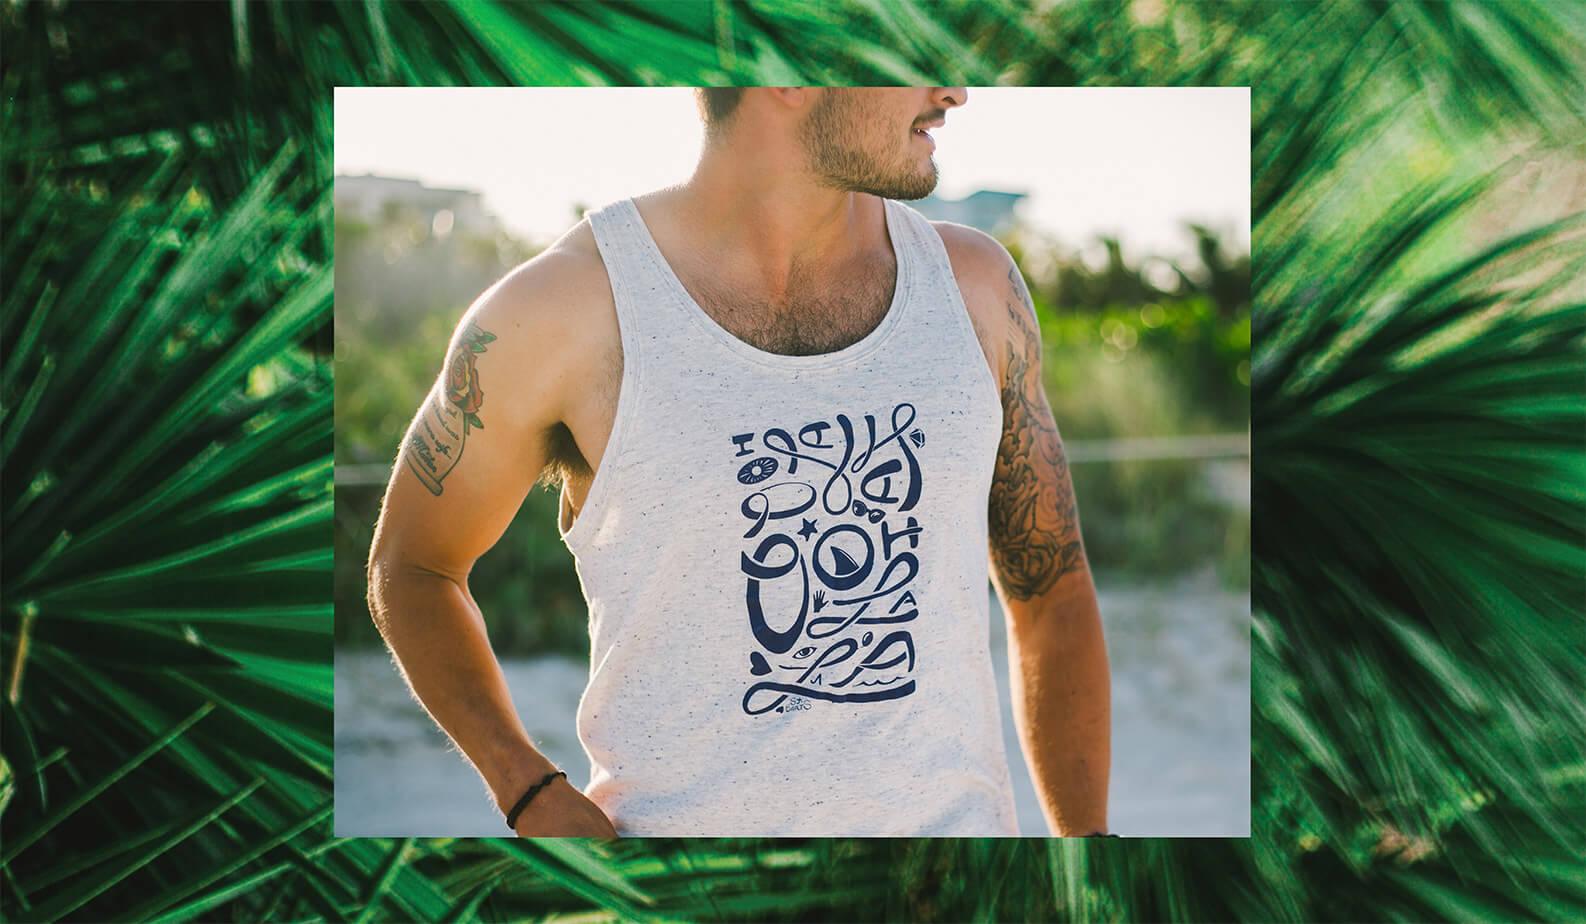 St Barths illustration on a tank by Jacober Creative